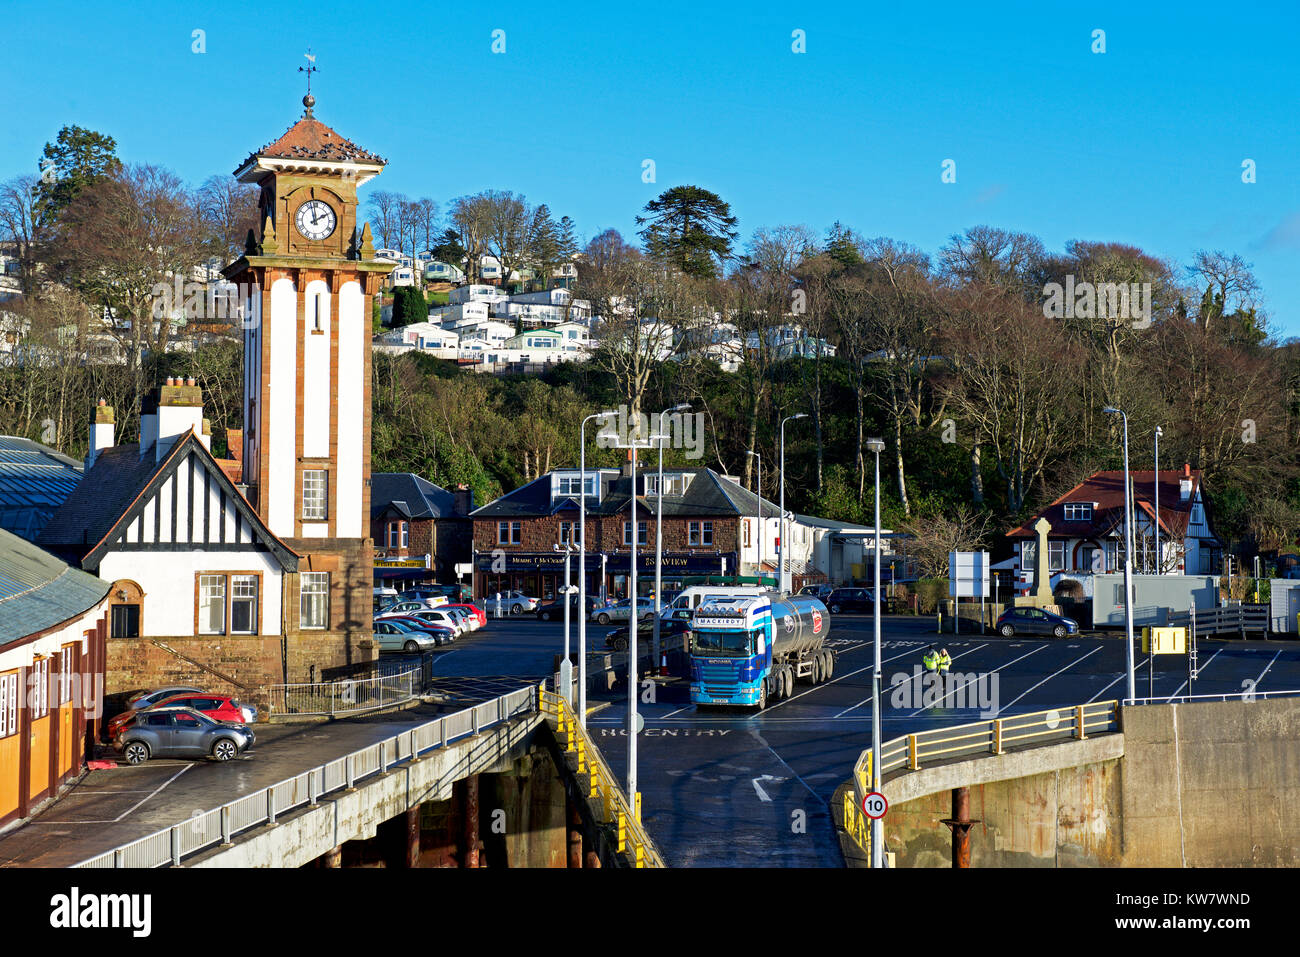 Lorry boarding the ferry at Wemyss Bay, Firth of Clyde, Scotland UK Stock Photo